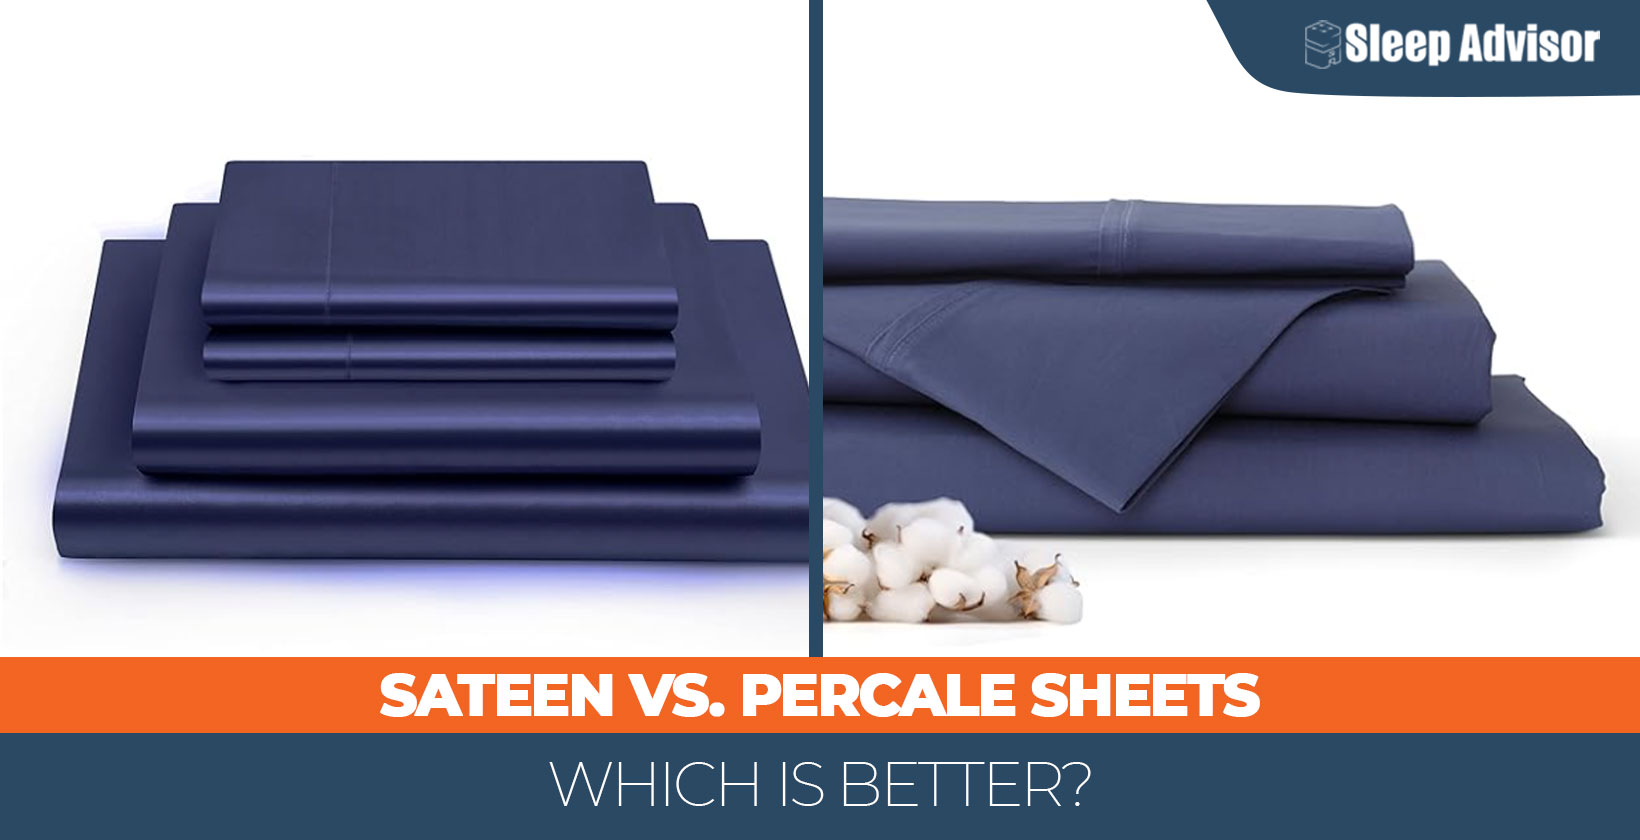 Sateen vs. Percale Sheets: Which Is Better?